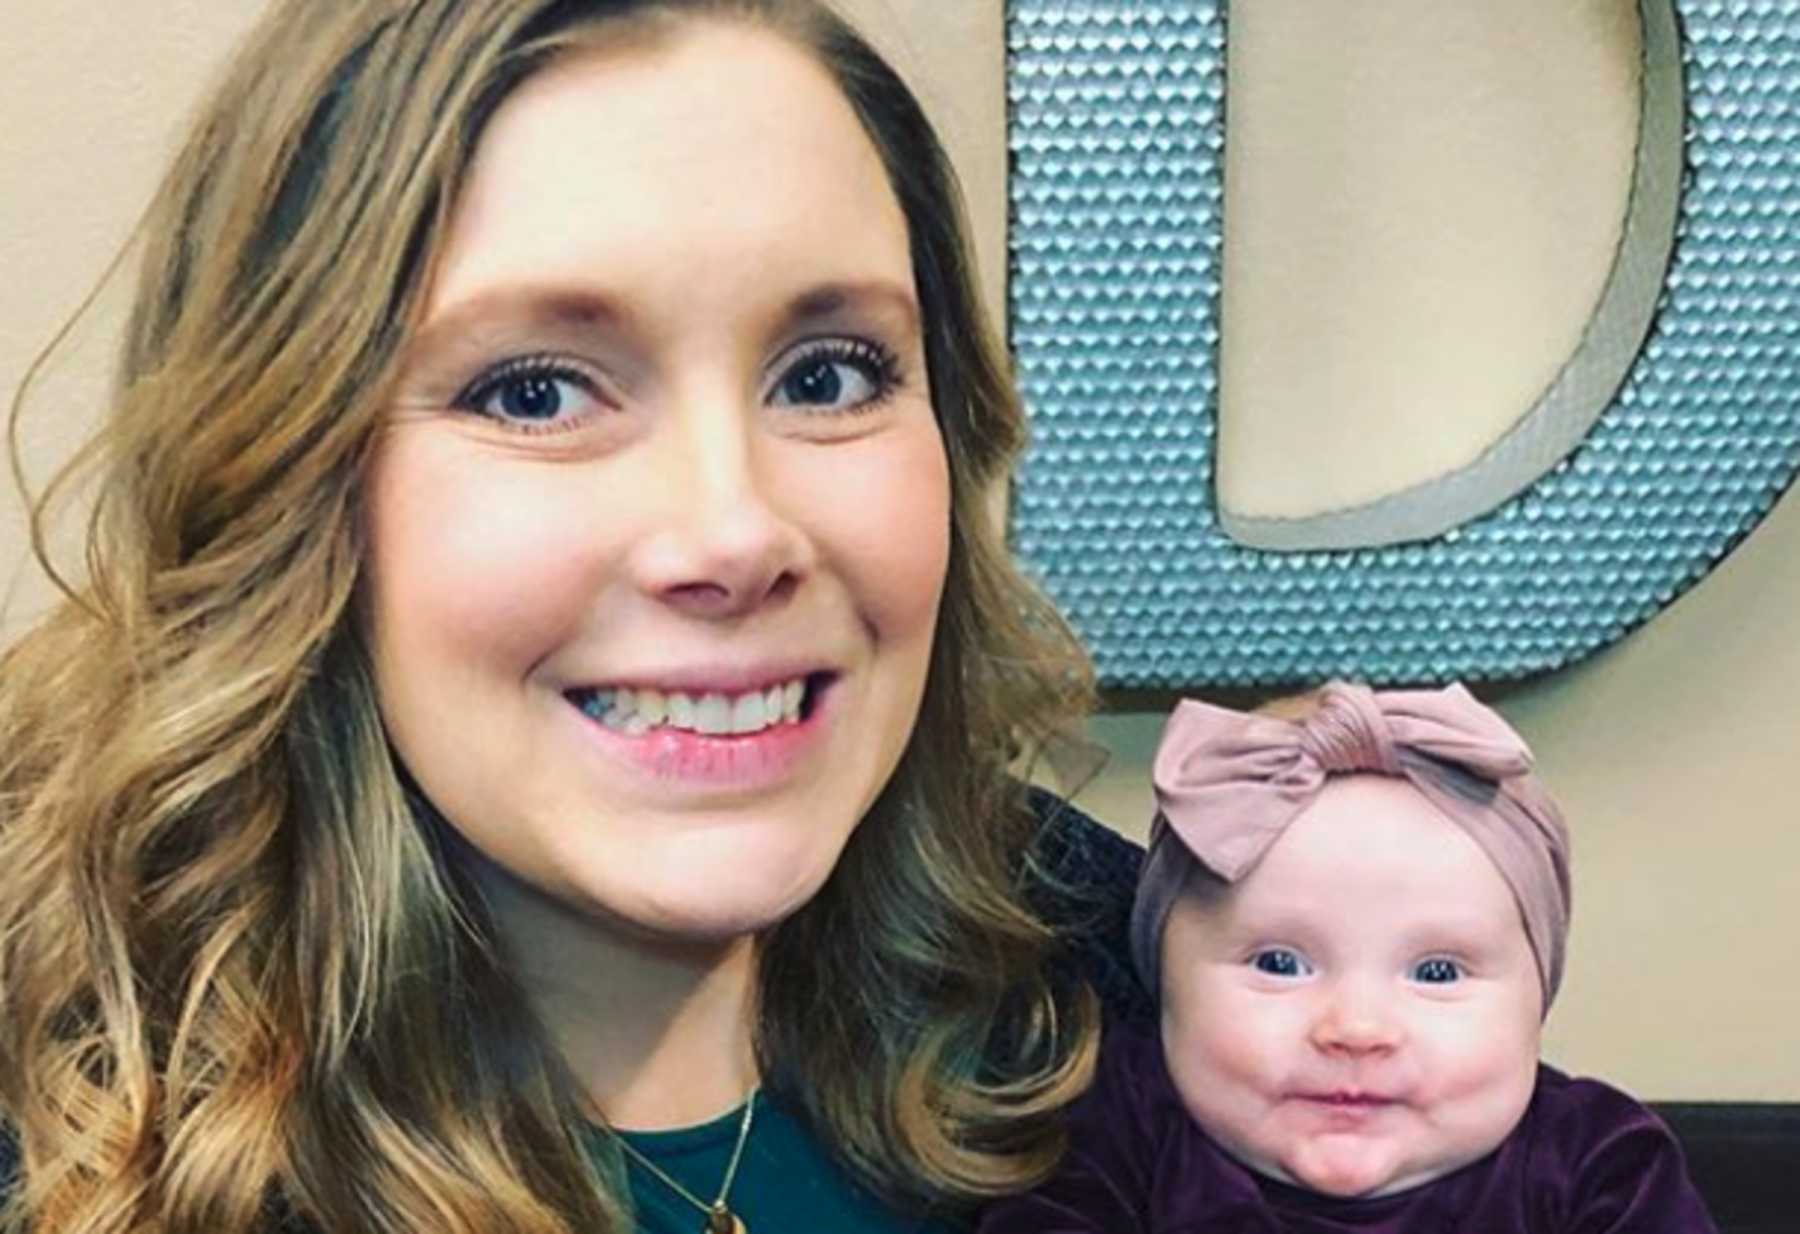 Anna Duggar Gets Called Out For Controversial Conspiracy Post